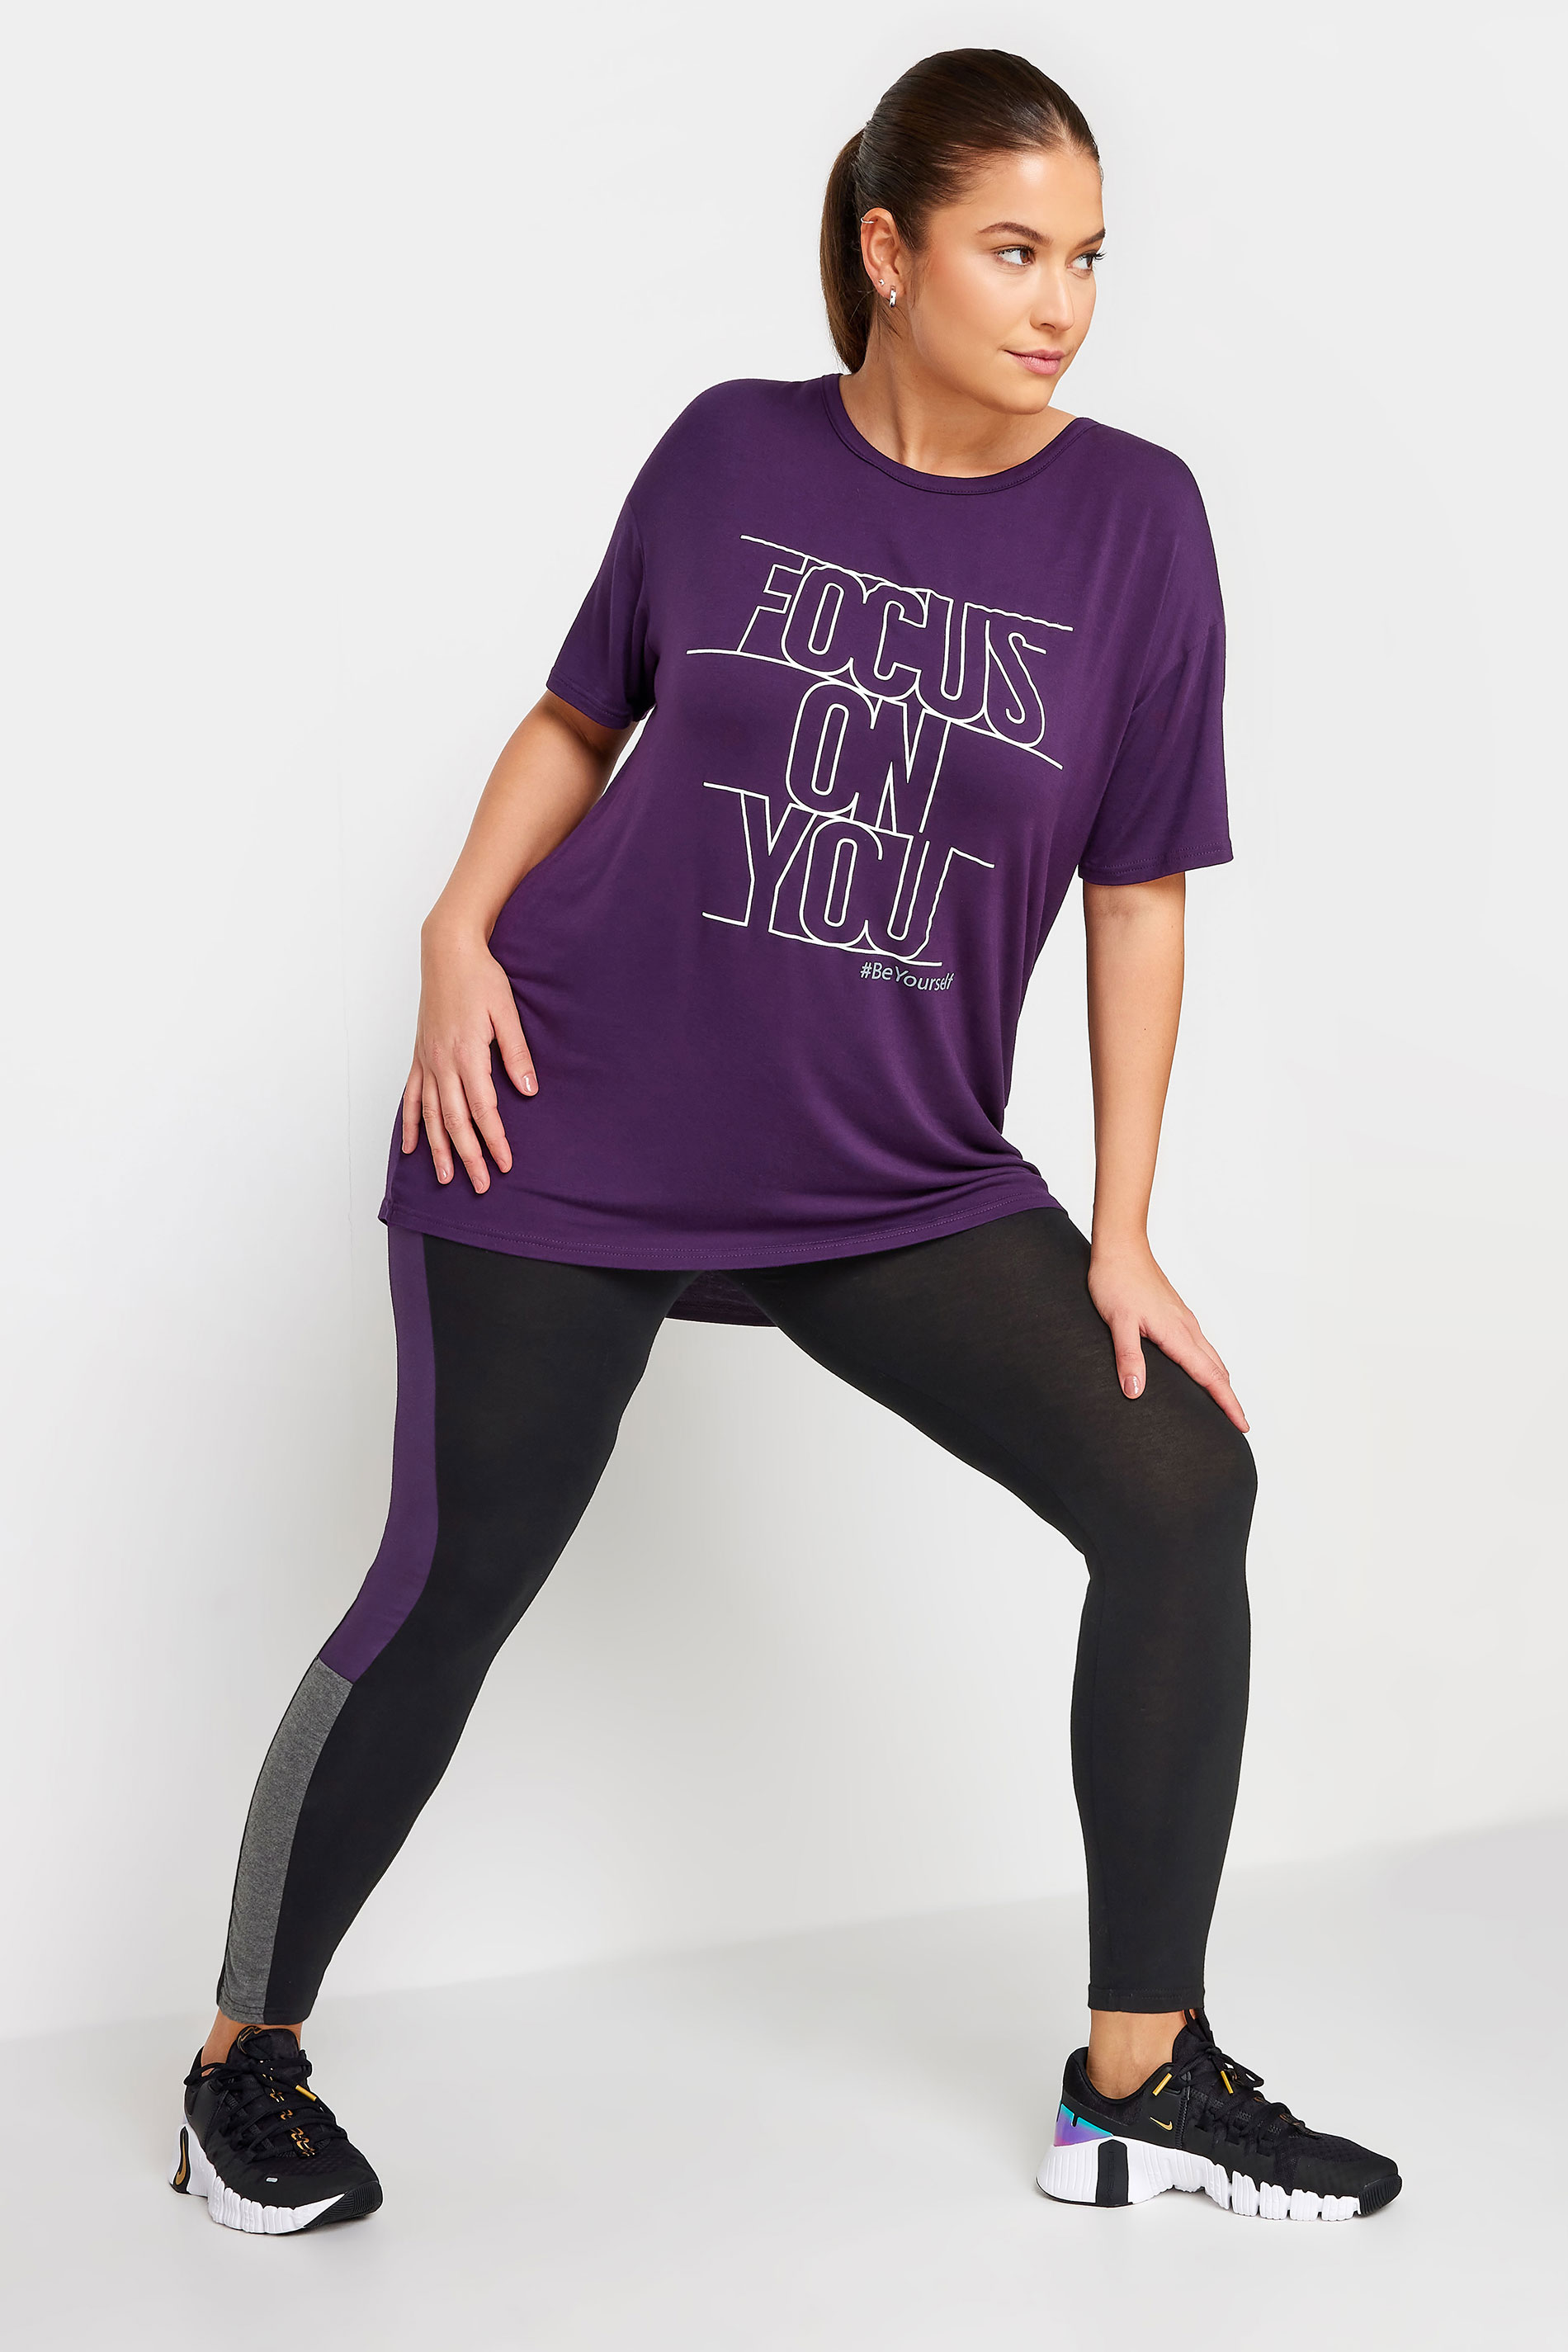 YOURS ACTIVE Plus Size Purple 'Focus On You' Slogan Top | Yours Clothing 2